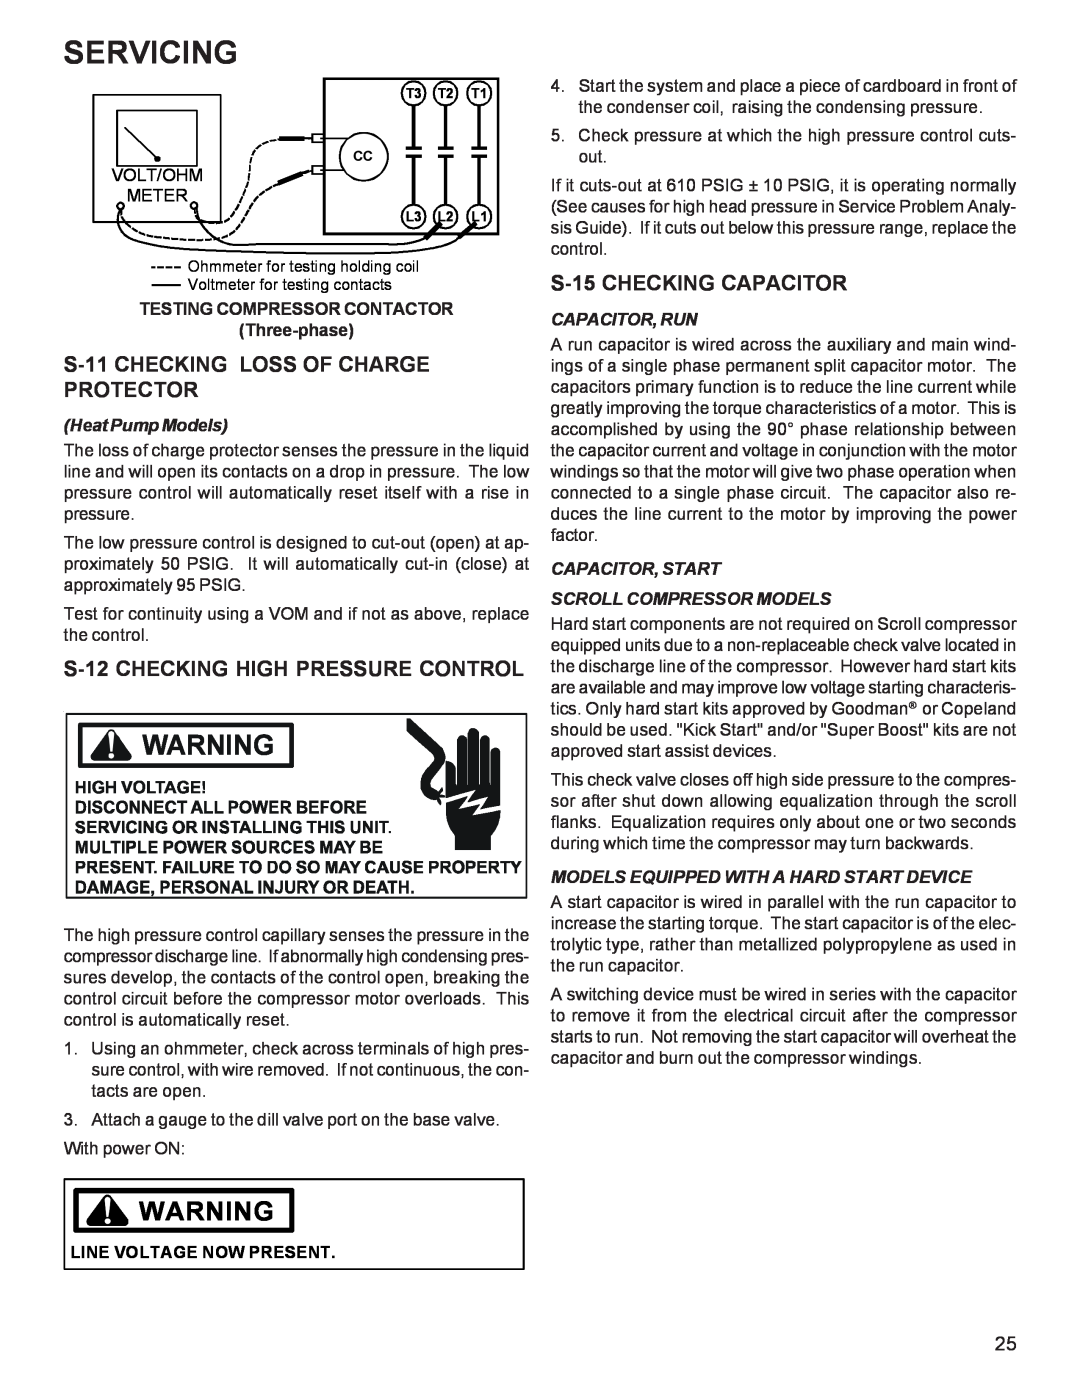 Goodman Mfg R-410A manual S-11CHECKING LOSS OF CHARGE PROTECTOR, S-12CHECKING HIGH PRESSURE CONTROL, S-15CHECKING CAPACITOR 